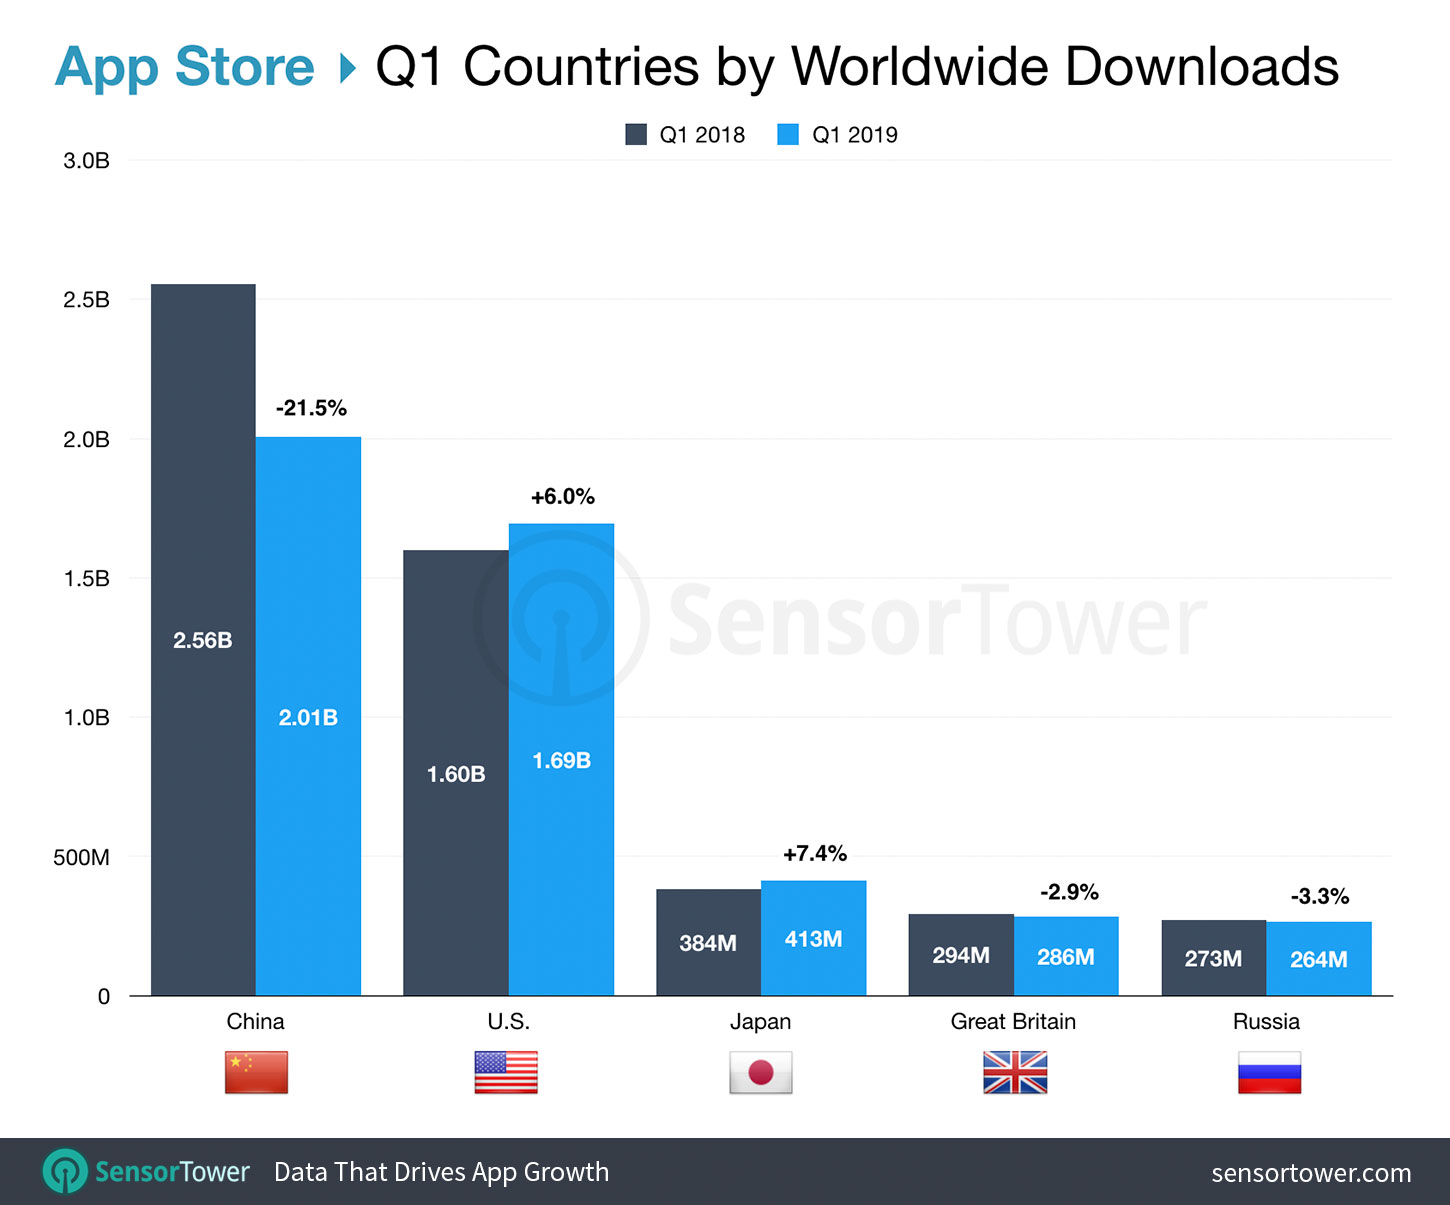 Top Countries in the App Store for Q1 2019